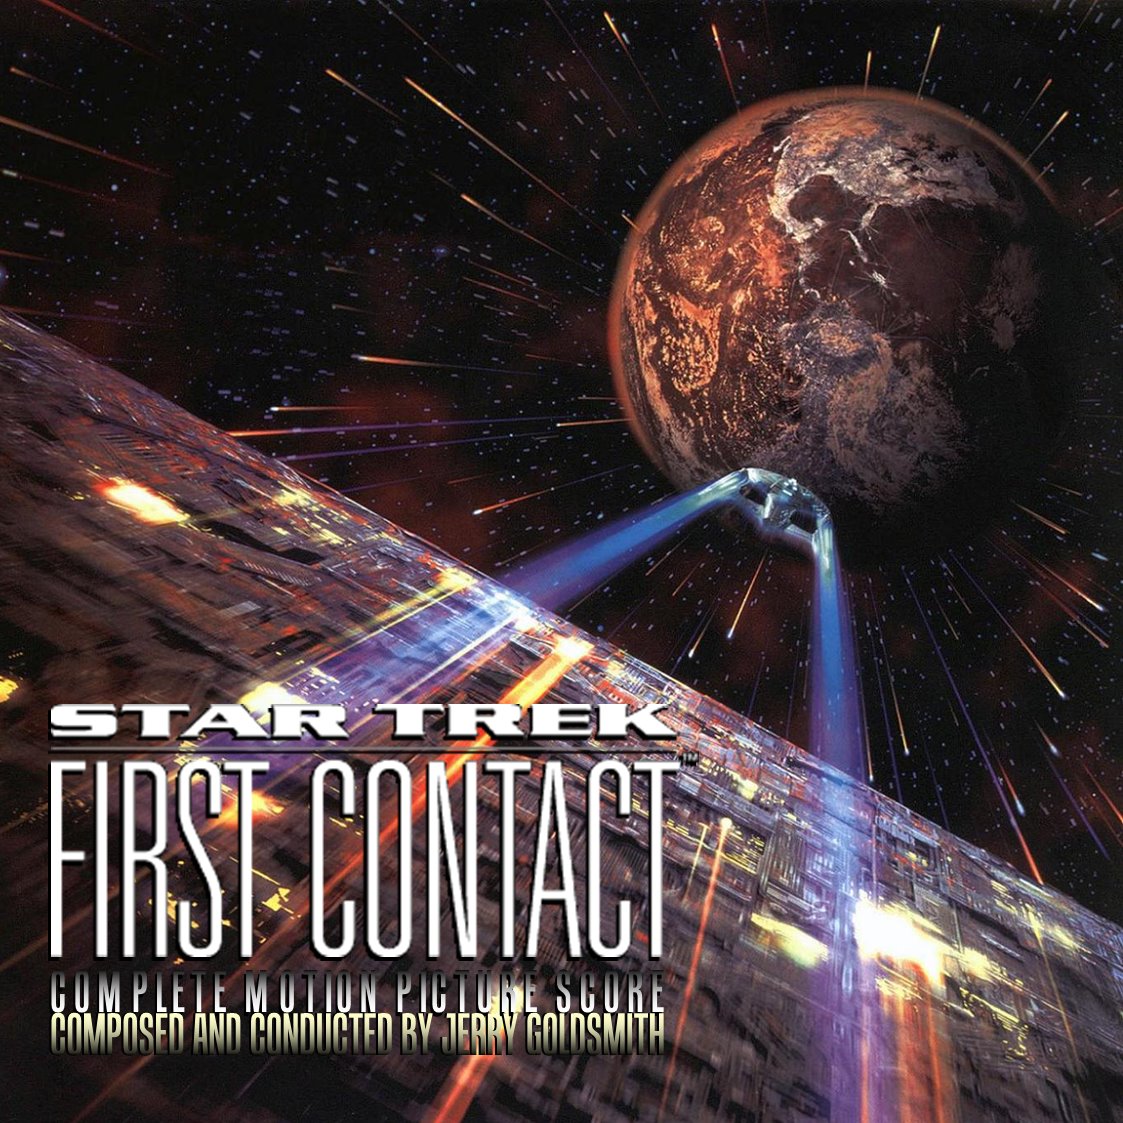 LE BLOG DE CHIEF DUNDEE: STAR TREK: FIRST CONTACT Complete ...